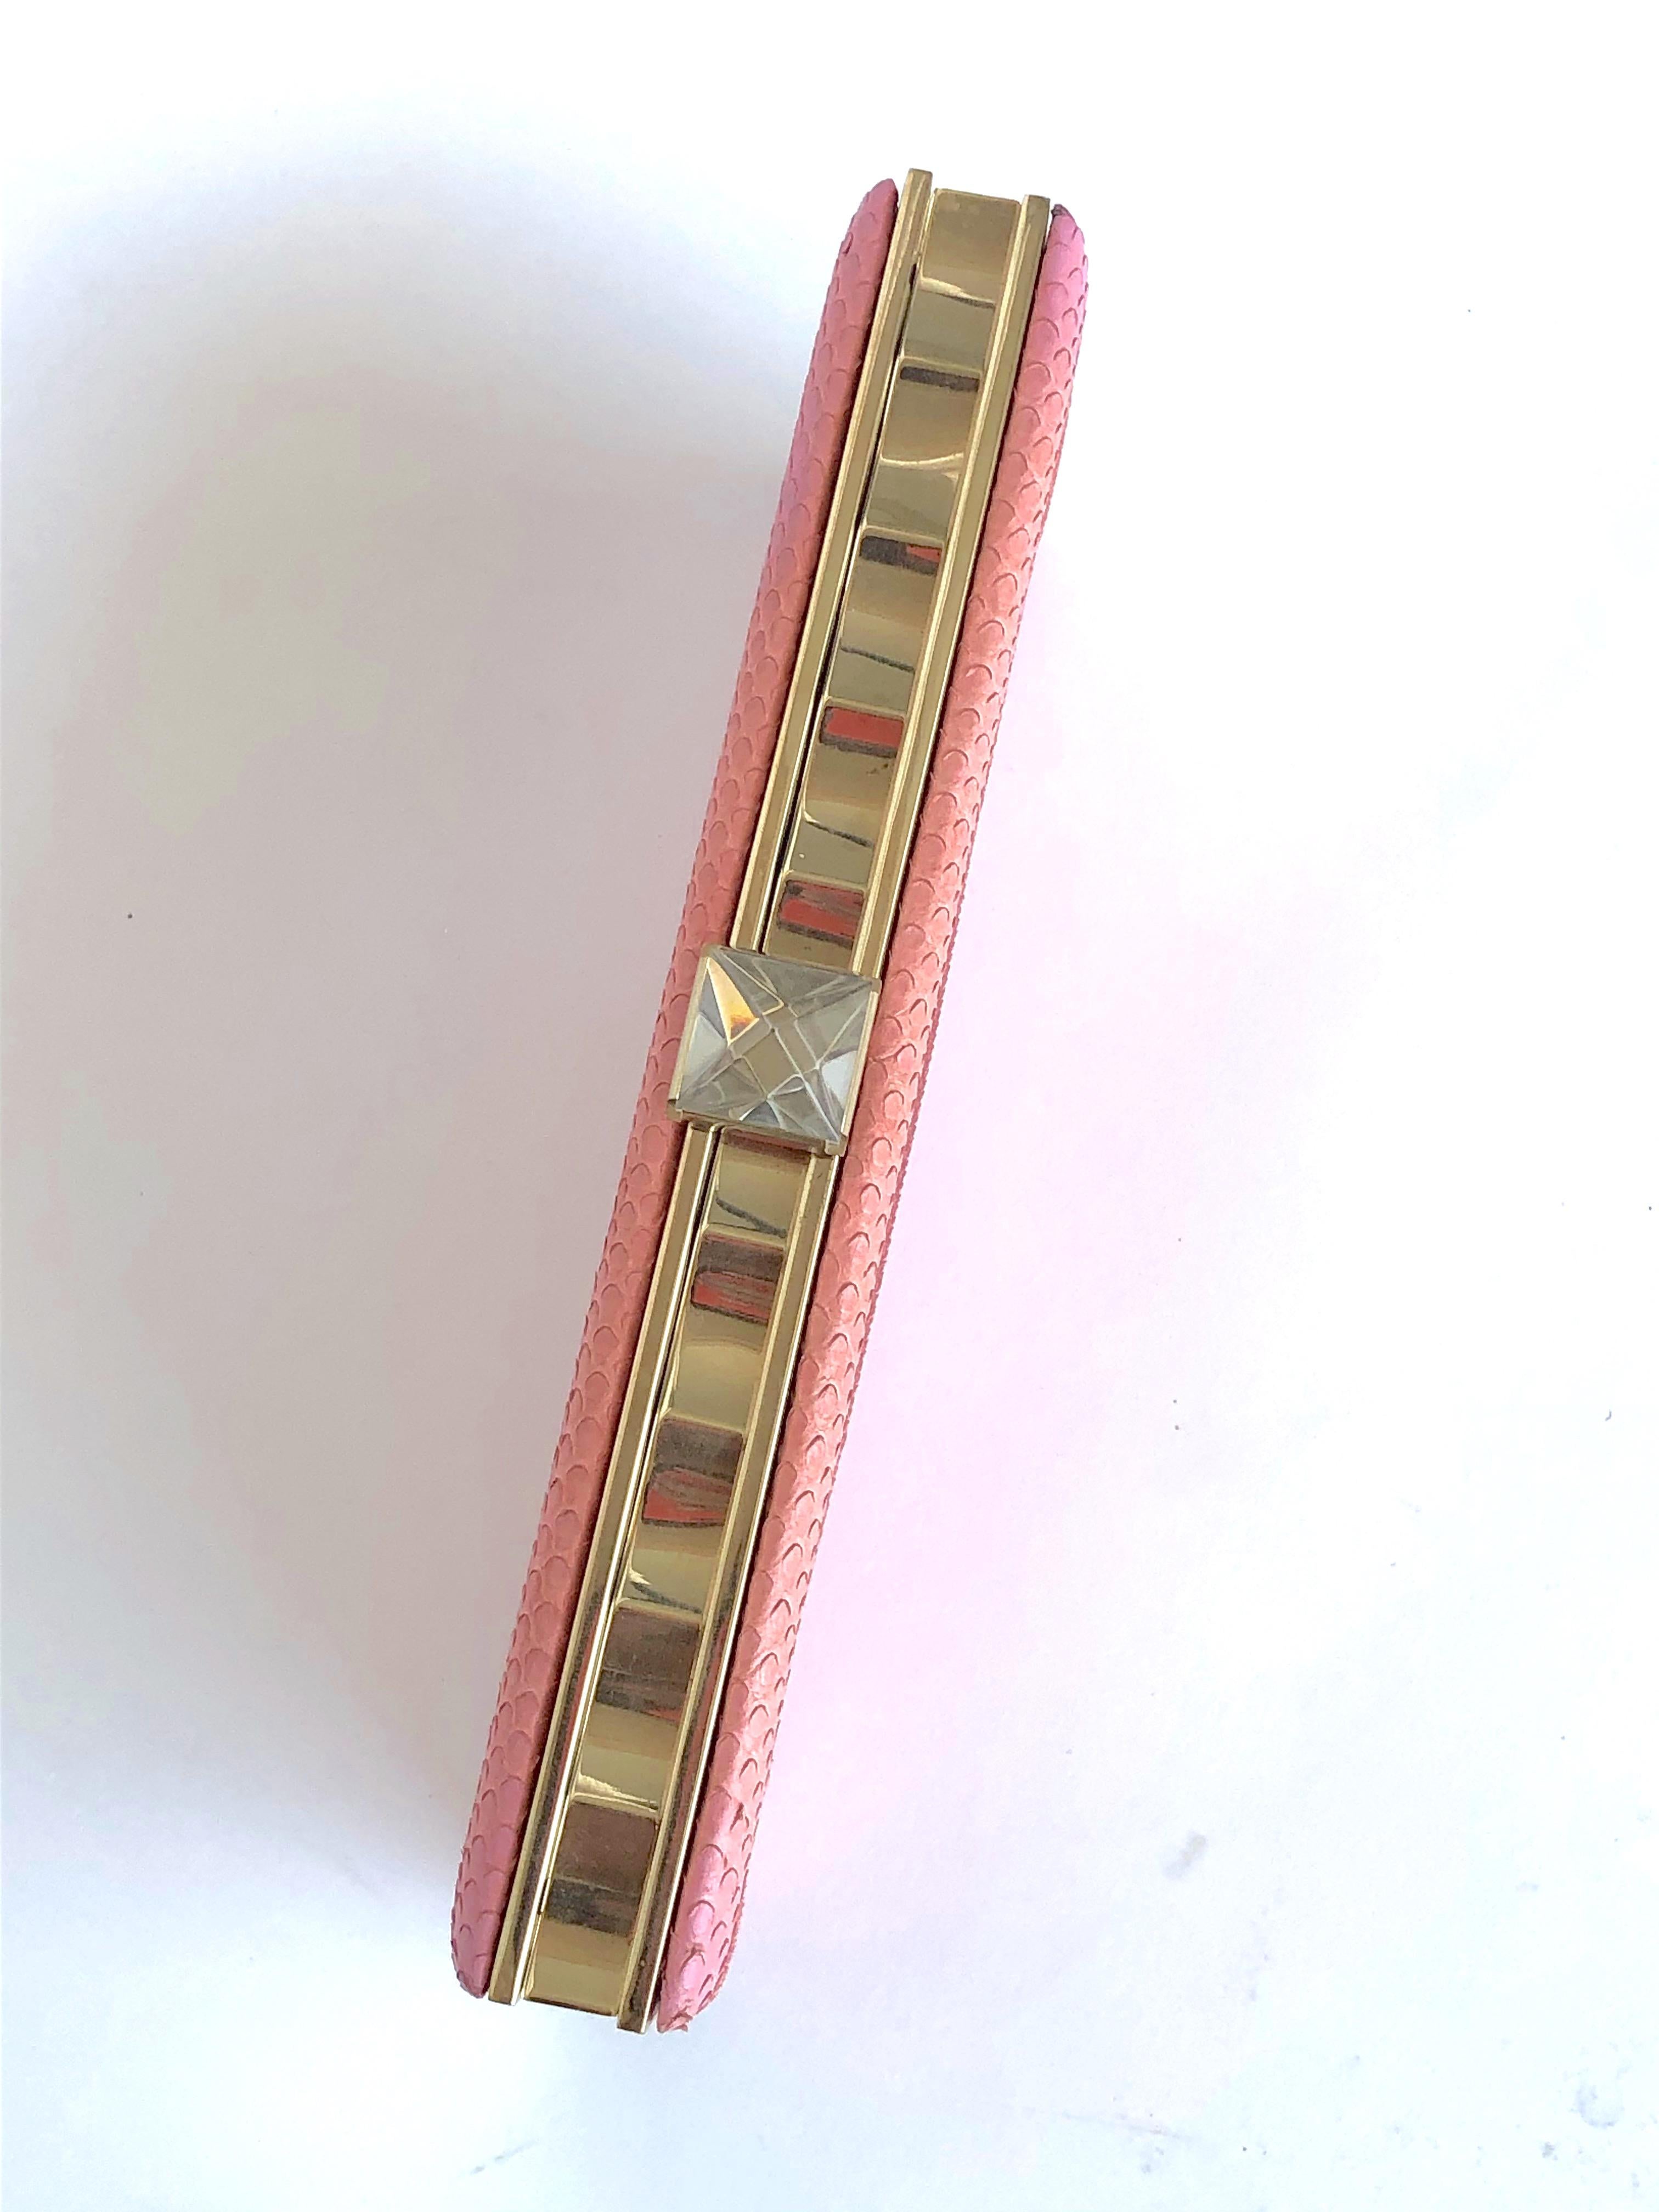 Pink snake skin upper. Gold-tone metal hardware. Curved metal frame. Clear crystal pyramid stud clasp detail. Red jacquard lining. Single pocket at interior. Gold-tone chain metal shoulder strap. Slight discoloration 